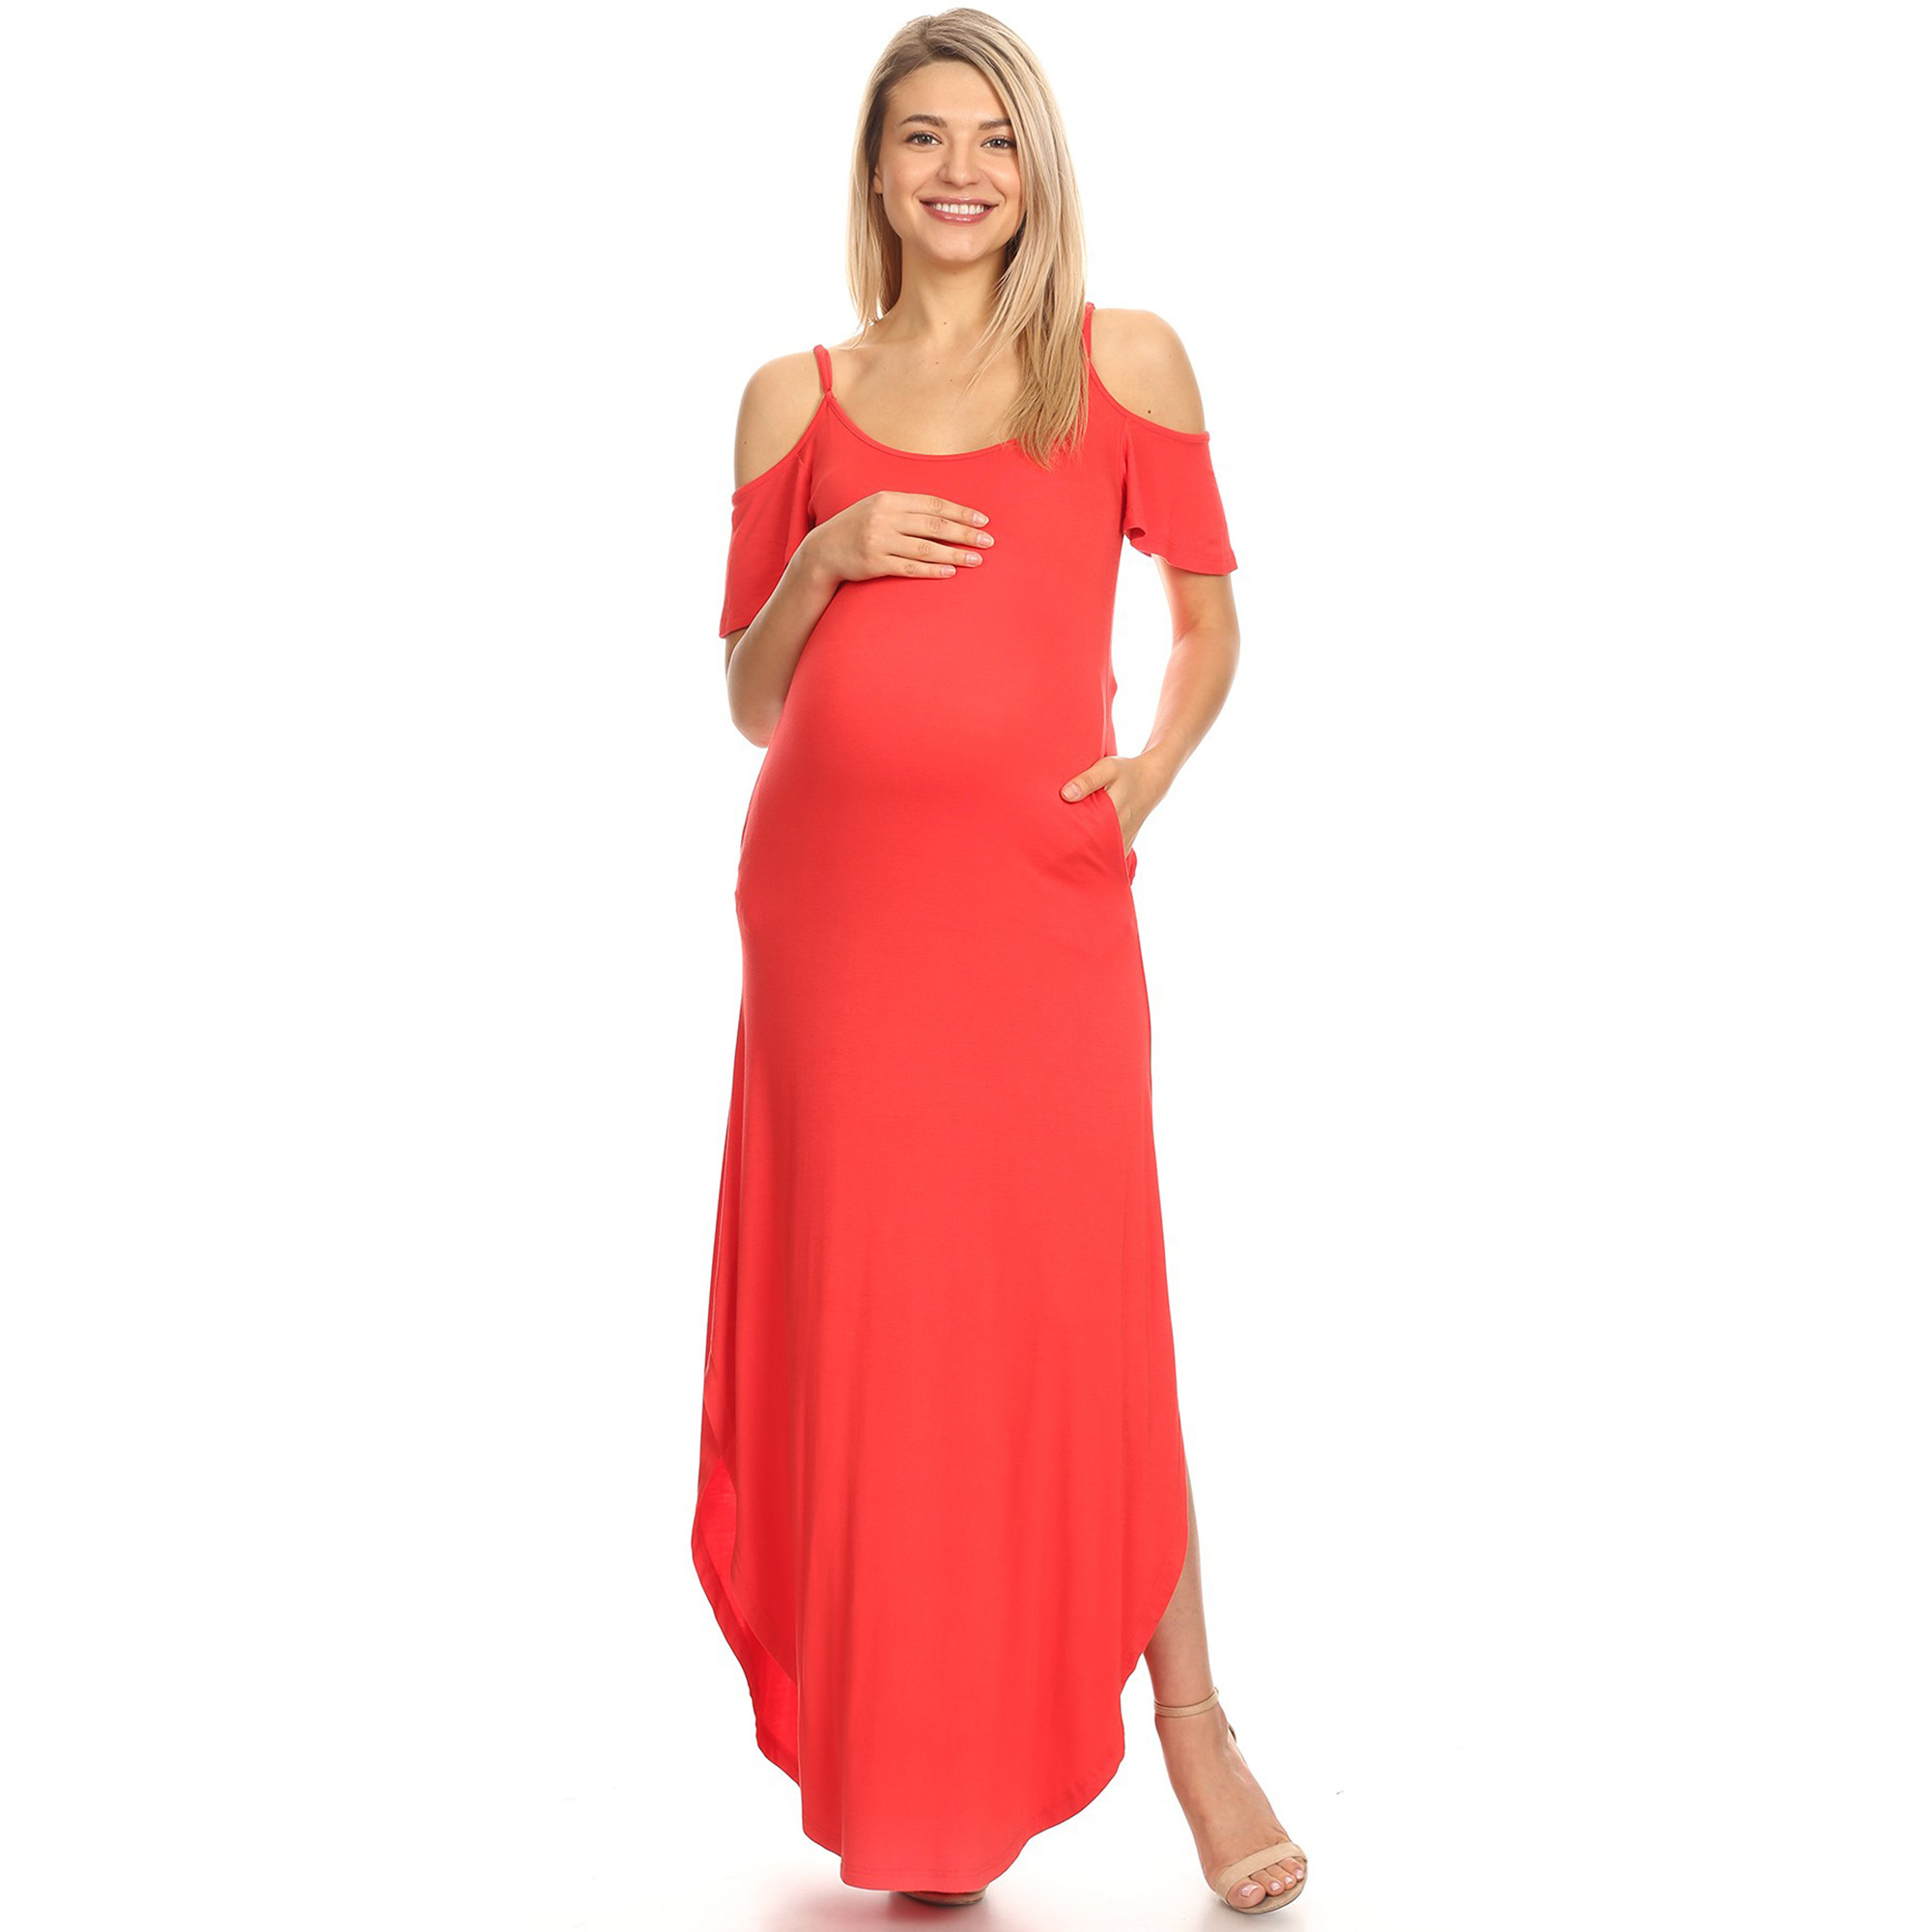 White Mark Women's Maternity Cold Shoulder Maxi Dress - Red, X-Large